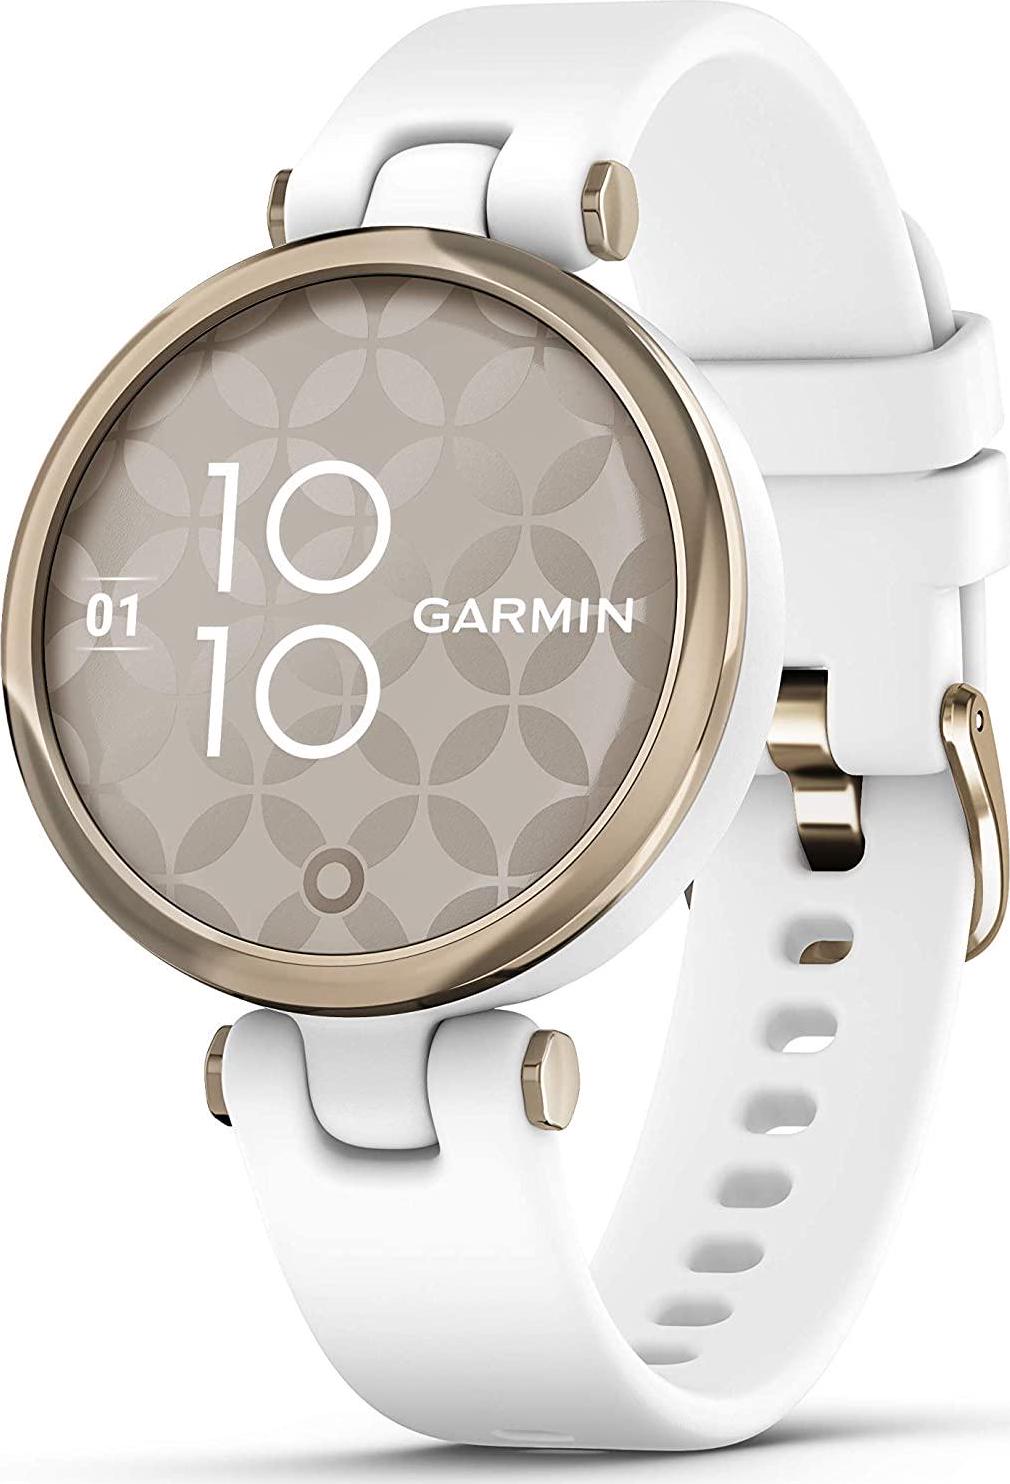 Garmin, Garmin Lily, Small GPS Smartwatch with Touchscreen and Patterned Lens, Light Gold and White, 1 inch (010-02384-00)